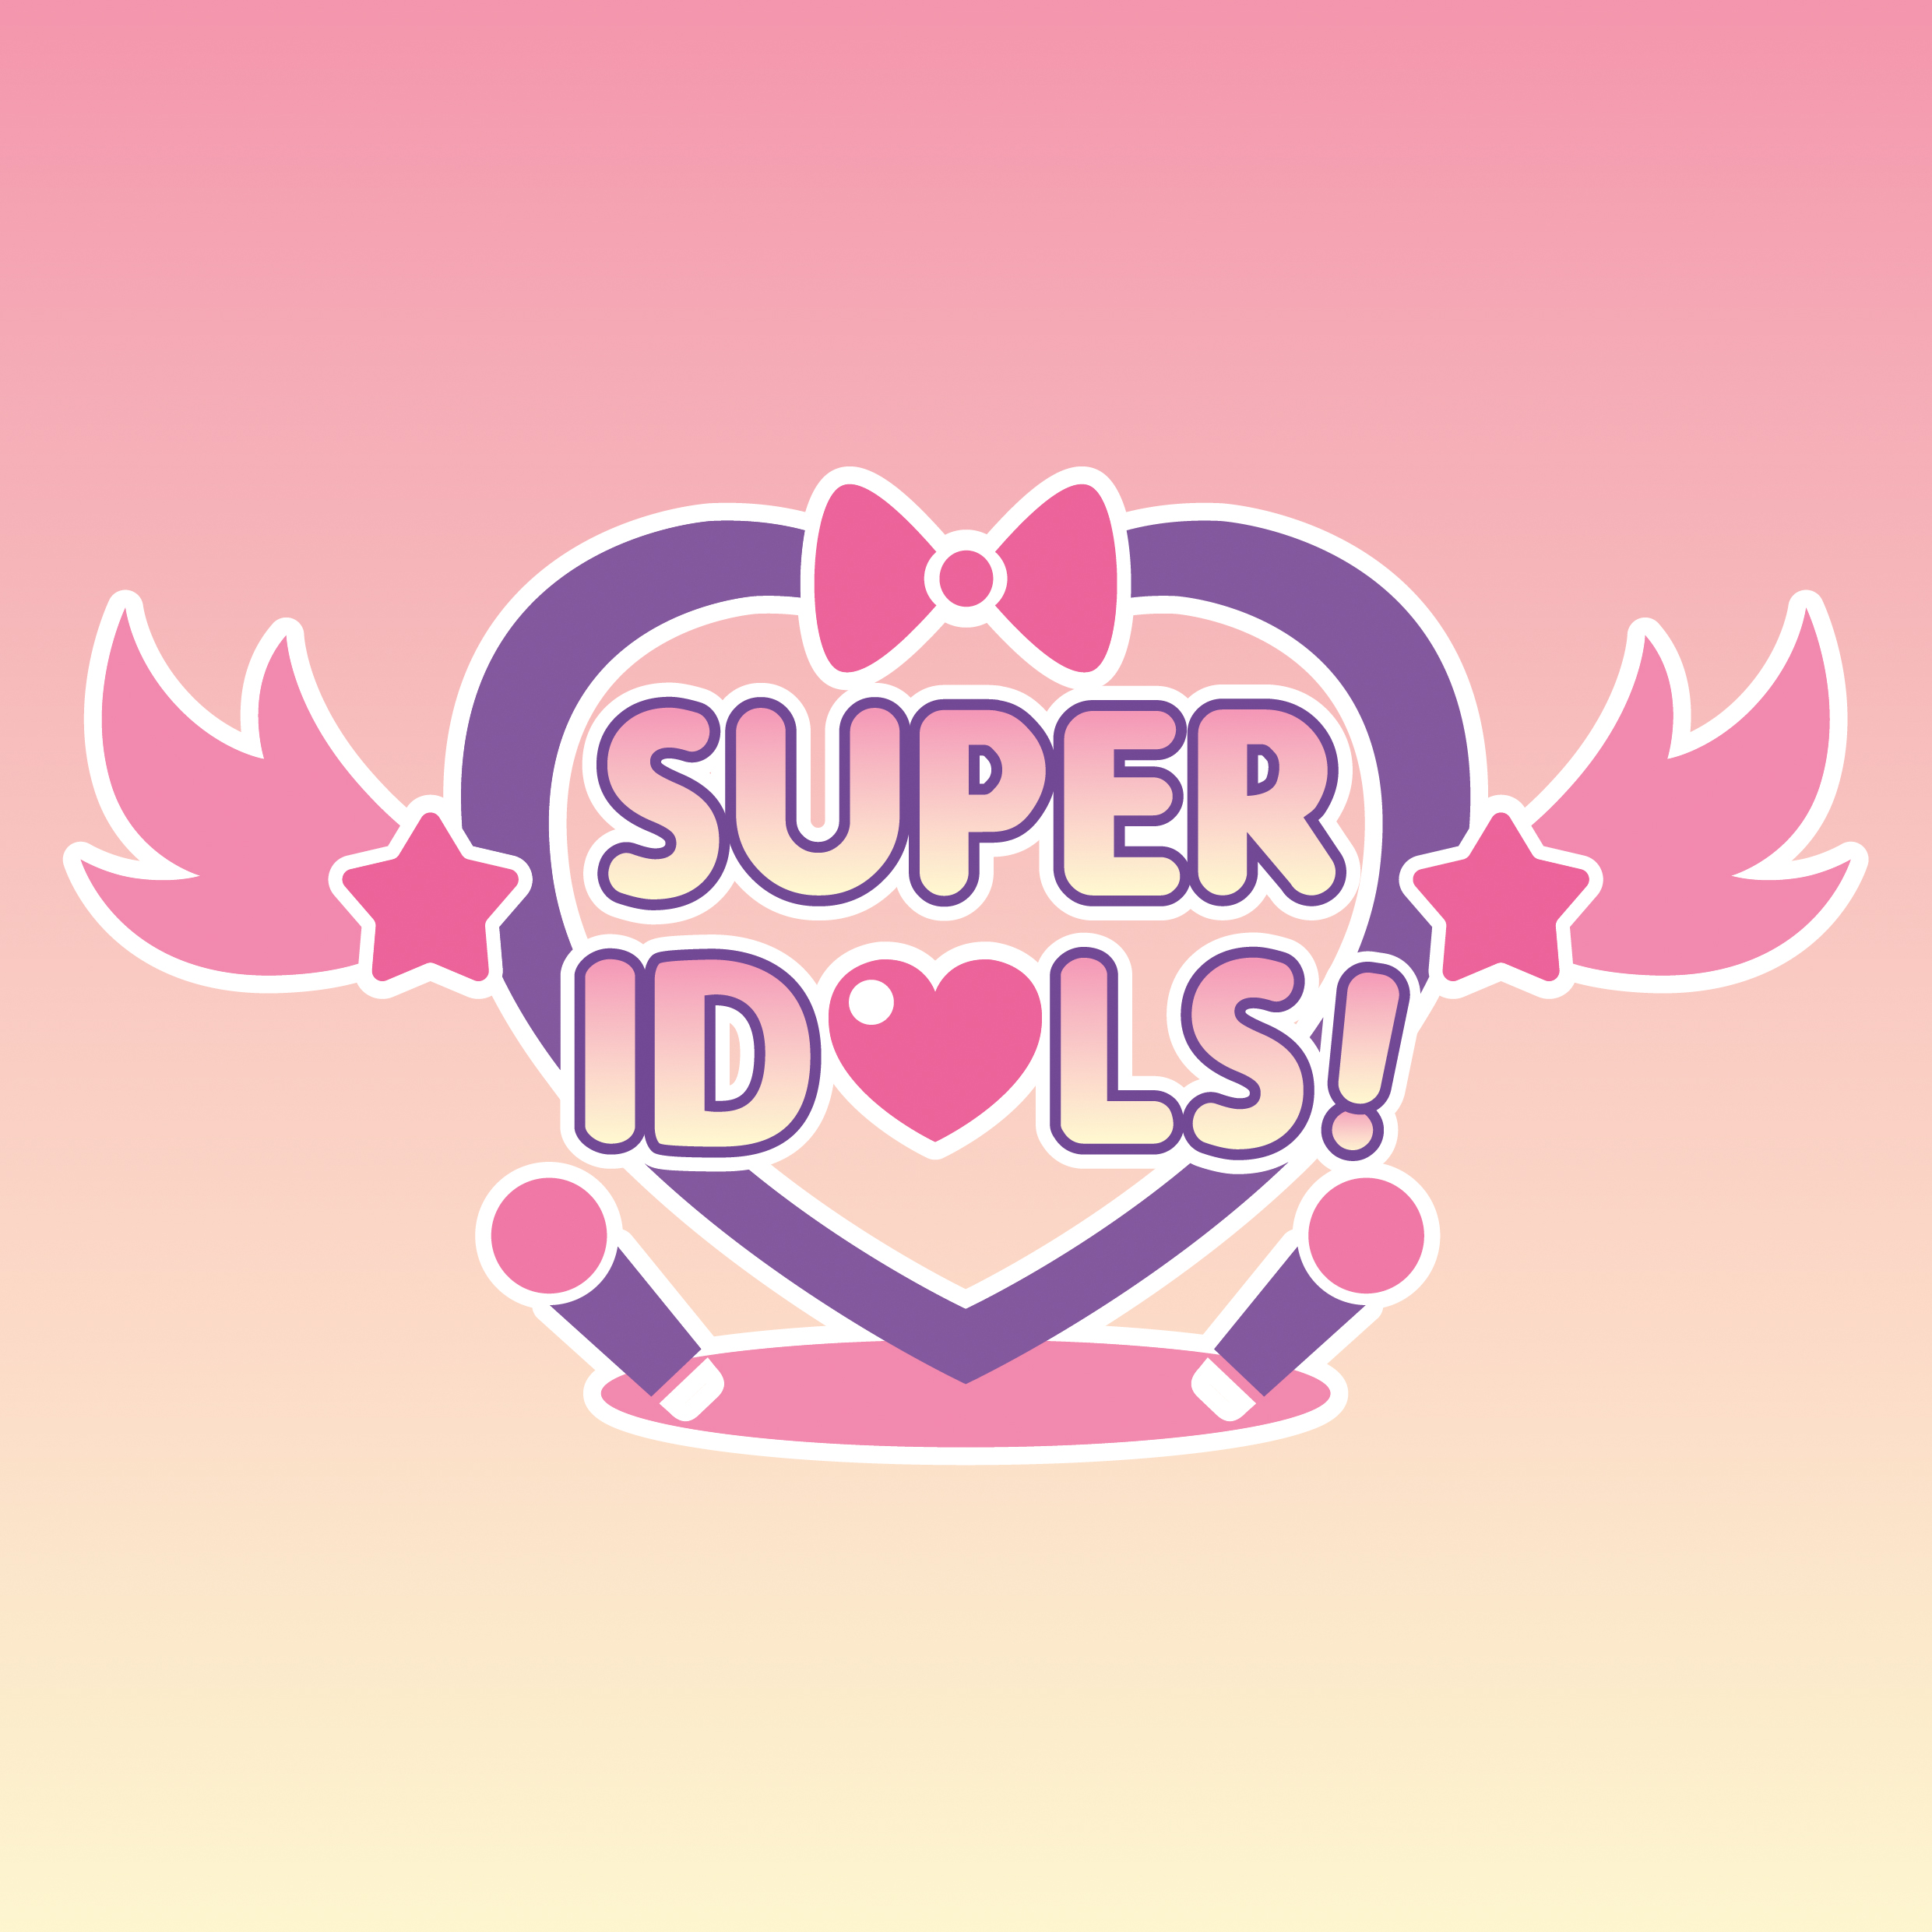 Logo with the text "SuperIdols!" in all caps with a heart where the "O" would be. The text is bordered by a decorative purple heart with pink star wings and a small pink bow on top. Underneath the heart is a small pink platform and two pink and purple microphones pointing out in opposite directions (same angle as the bottom edges of the heart).